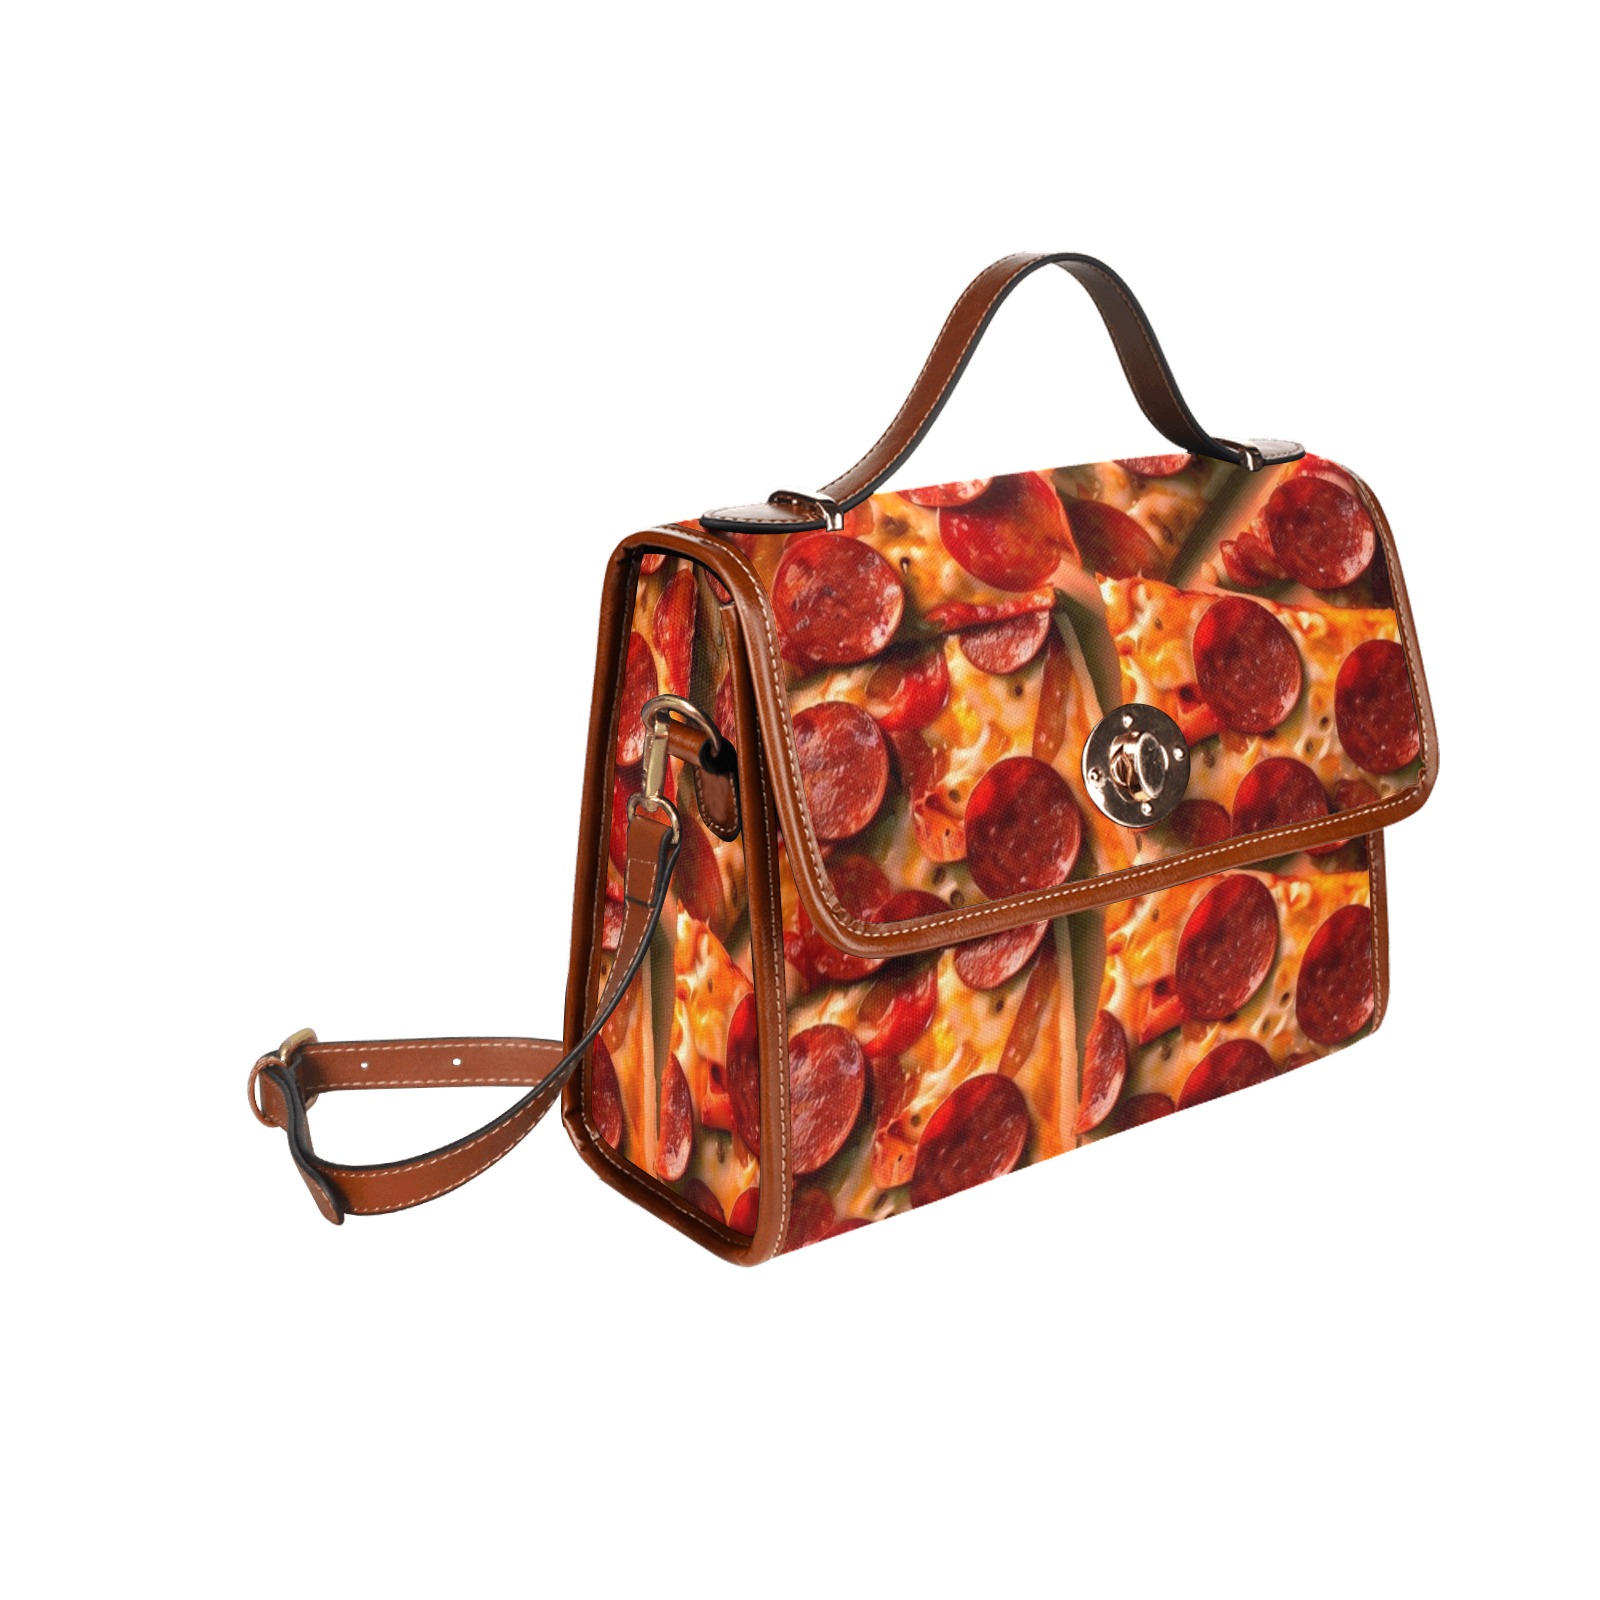 PEPPERONI PIZZA 11 Waterproof Canvas Bag-Brown (All Over Print) (Model 1641)